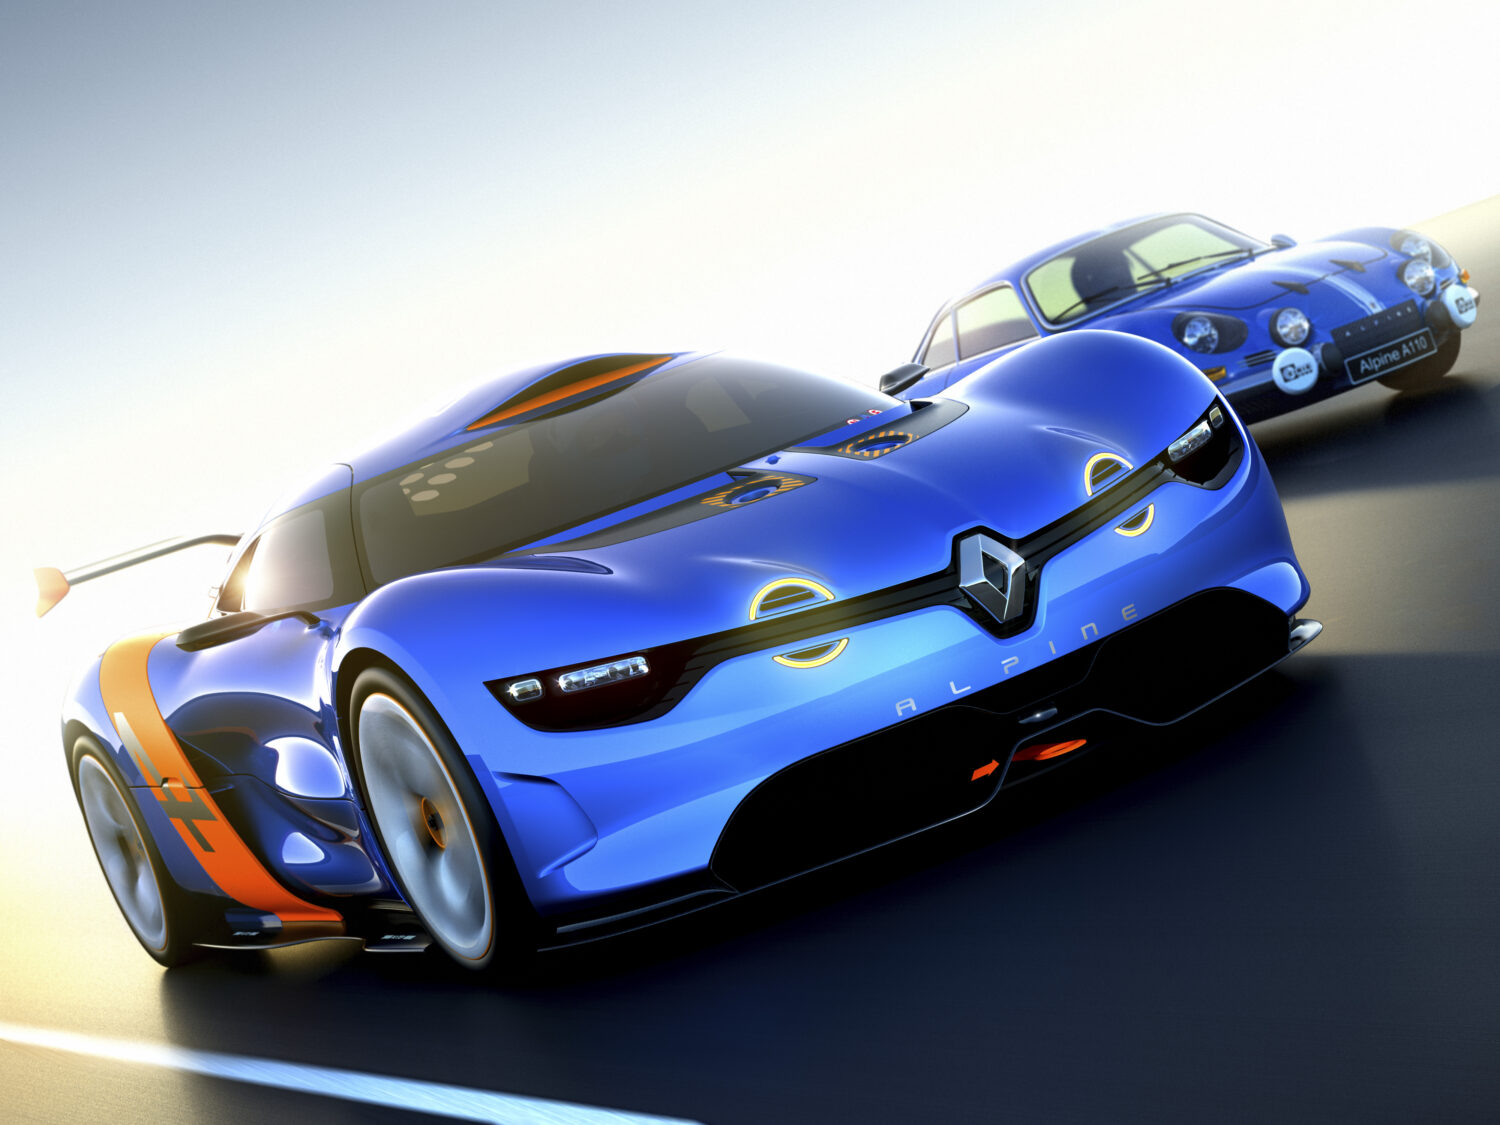 2021 - Story Alpine - 50 shades of blue: an iconic colour in motion